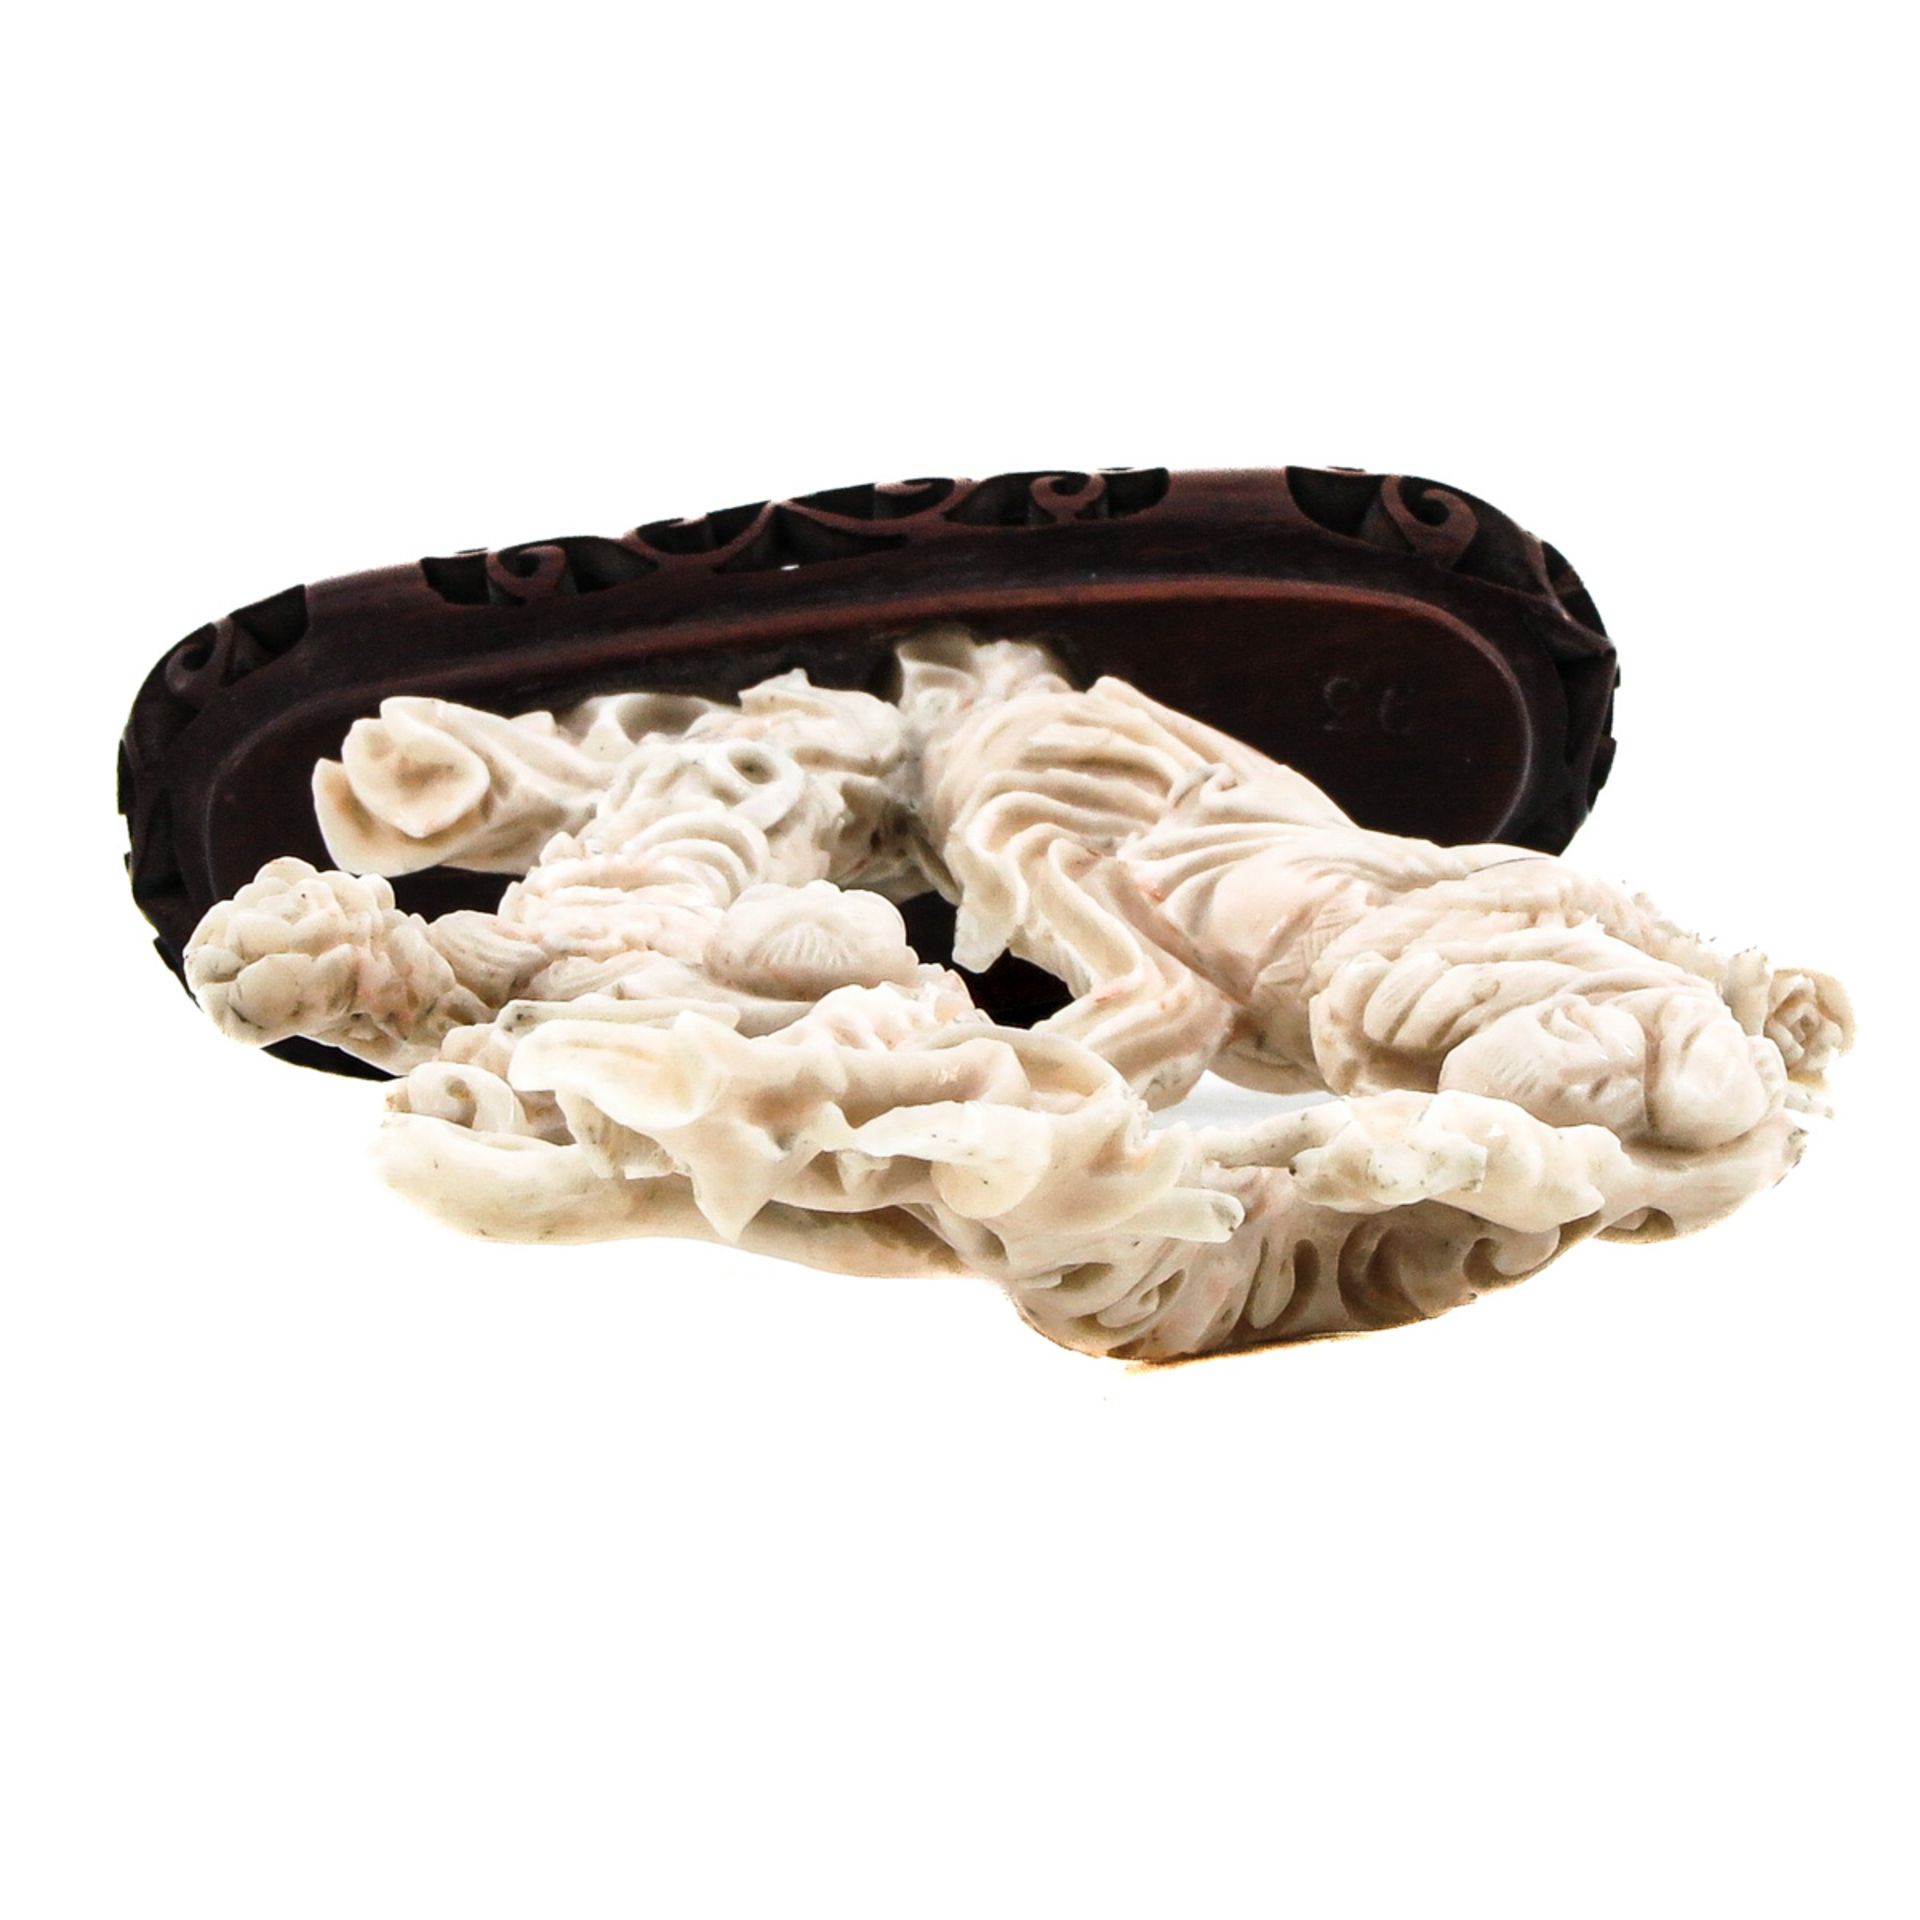 A White Coral Sculpture - Image 5 of 10